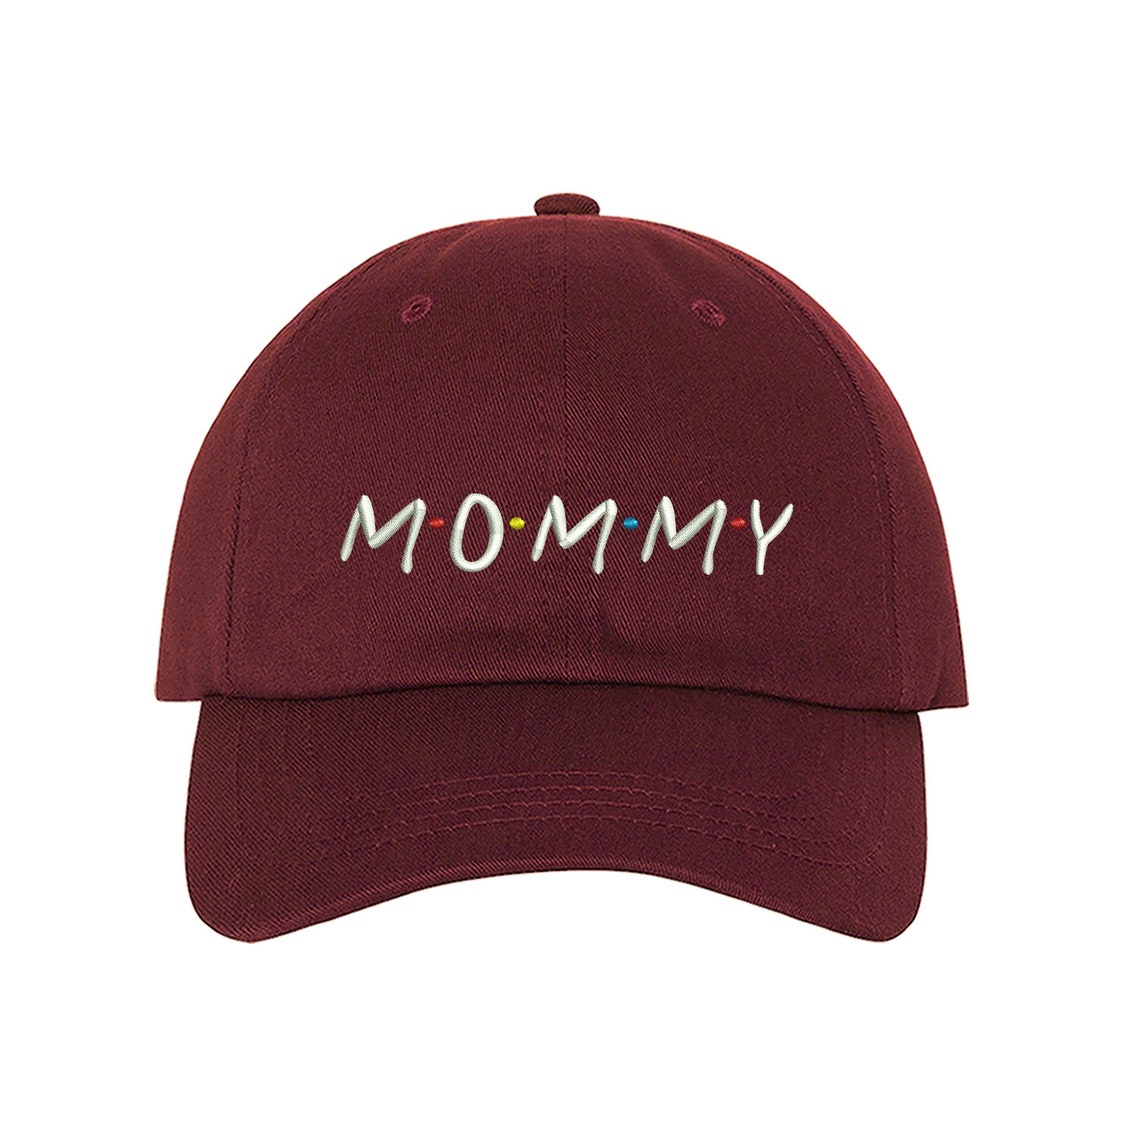 Mommy Baseball Hat Mom Hat Low Profile Cap Embroidered | Etsy